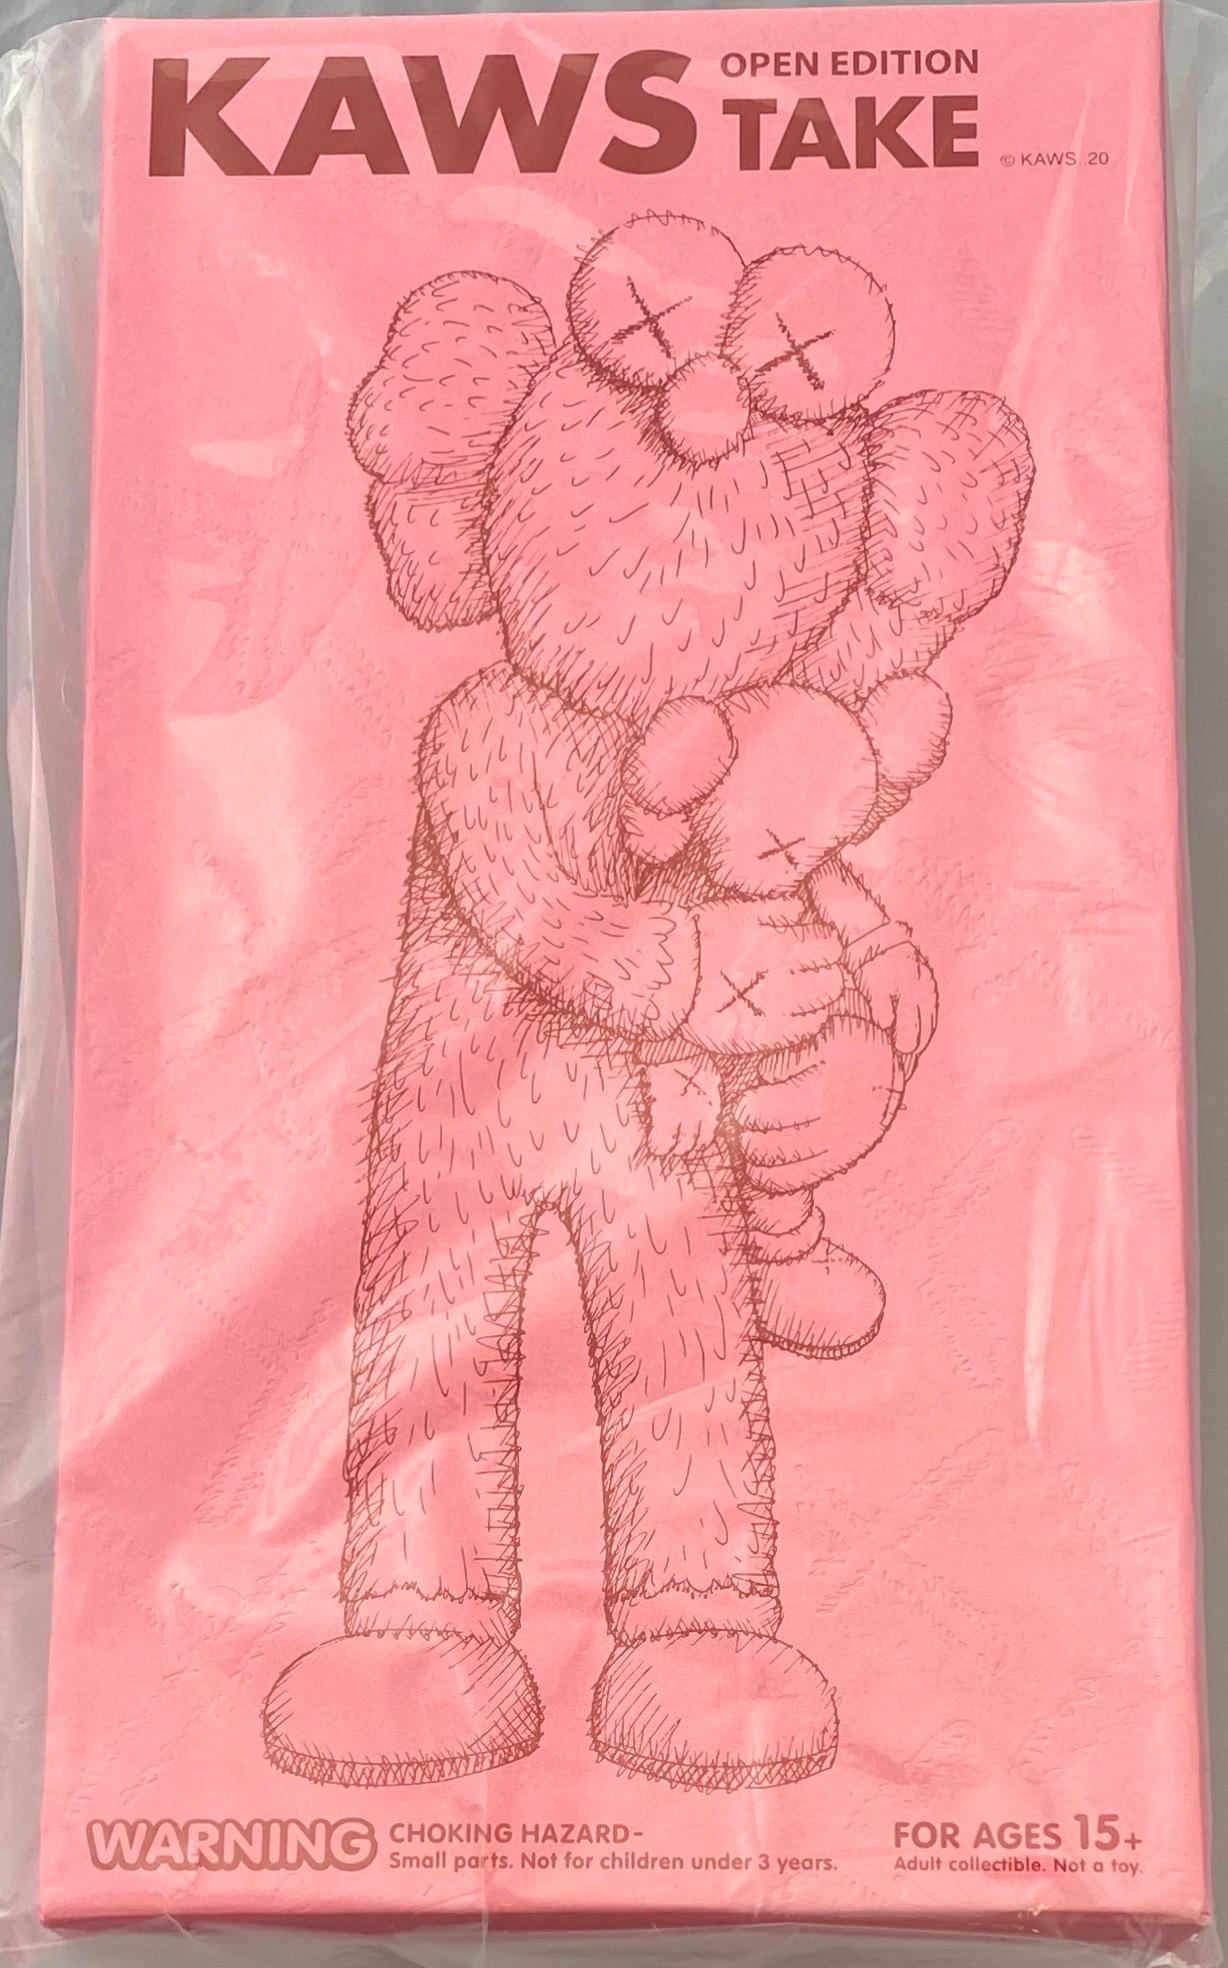 KAWS TAKE (Pink) figurative sculpture new & unopened in its original packaging. 
A well-received work and variation of KAWS' large scale TAKE sculpture - a key highlight of the exhibition, 'KAWS BLACKOUT at Skarstedt Gallery London in 2019 - the